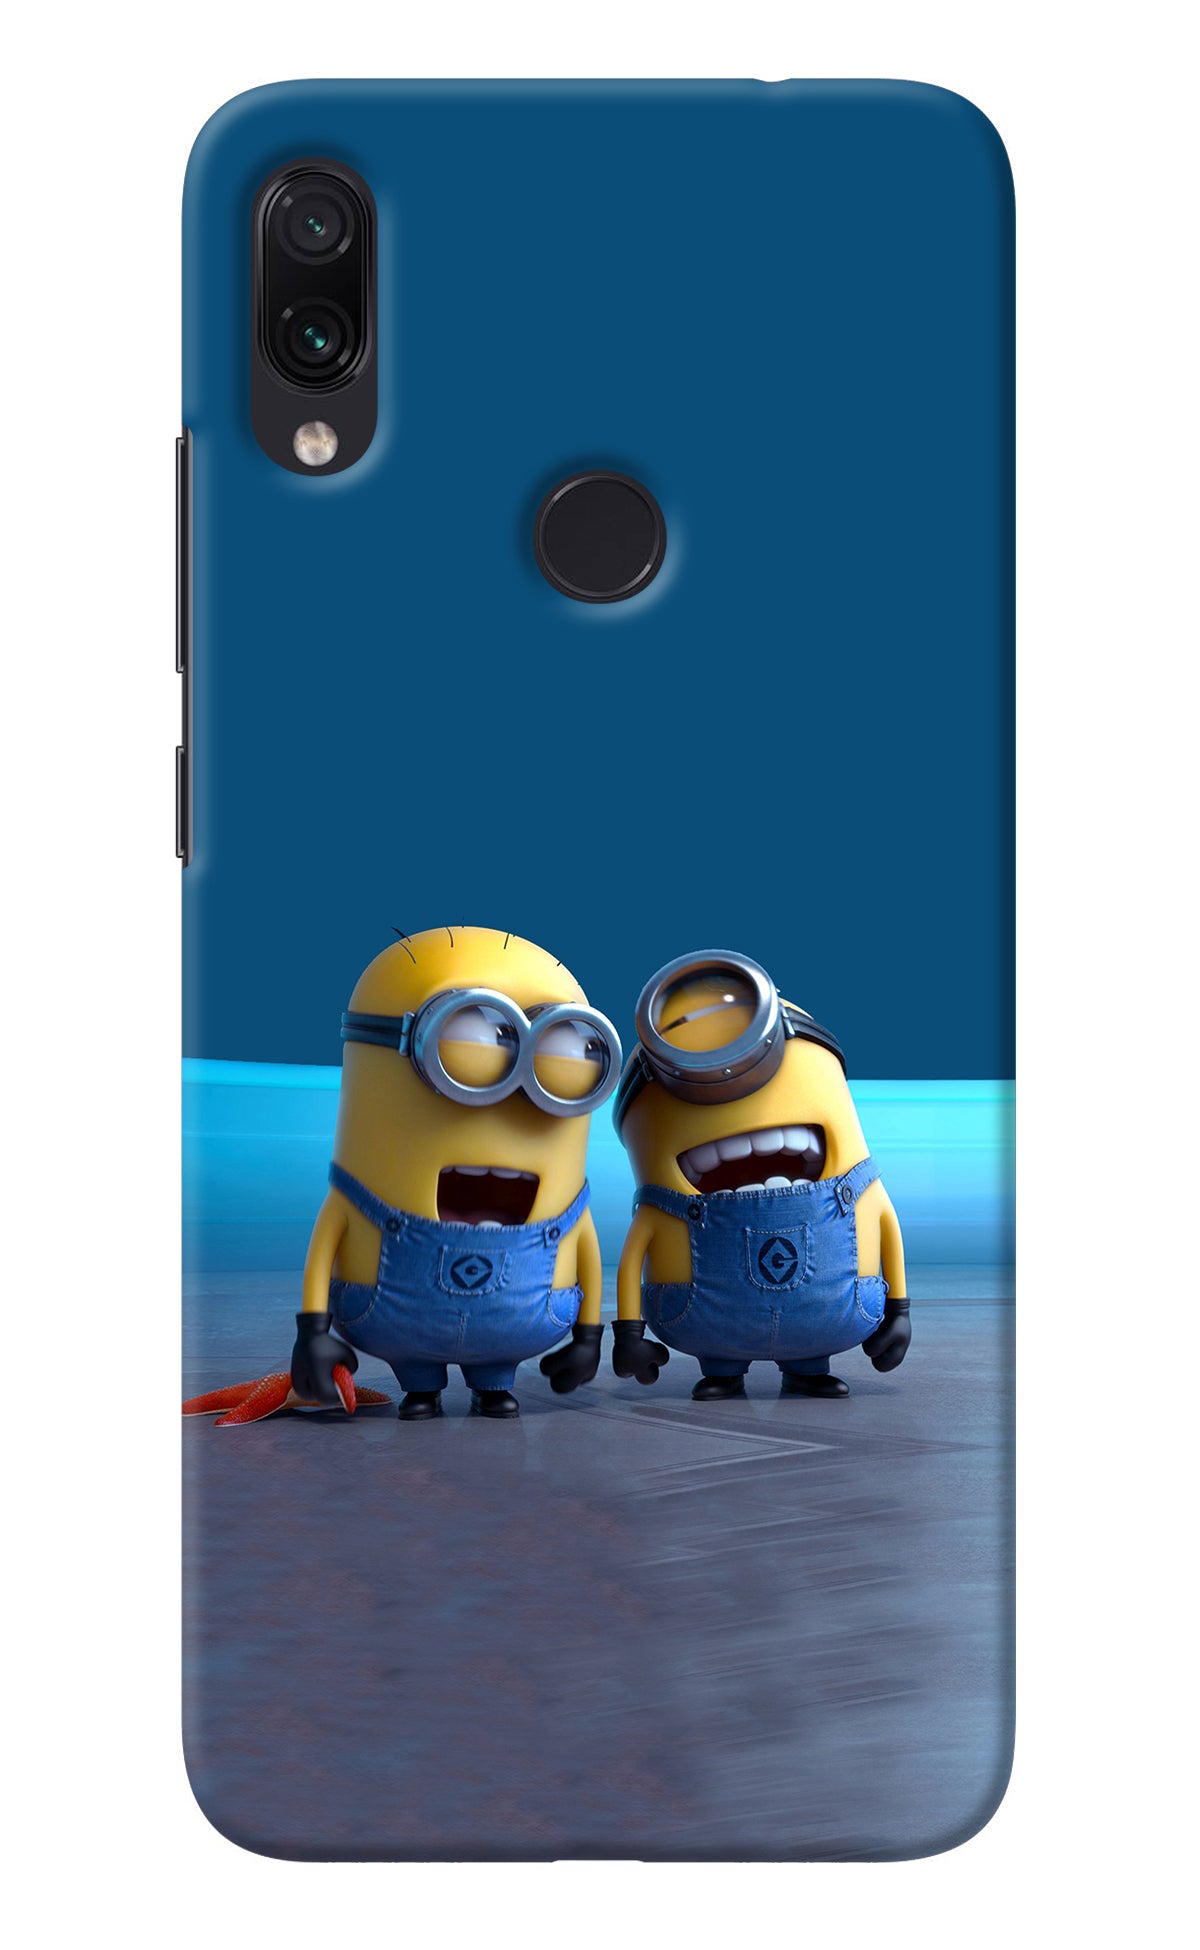 Minion Laughing Redmi Note 7 Pro Back Cover